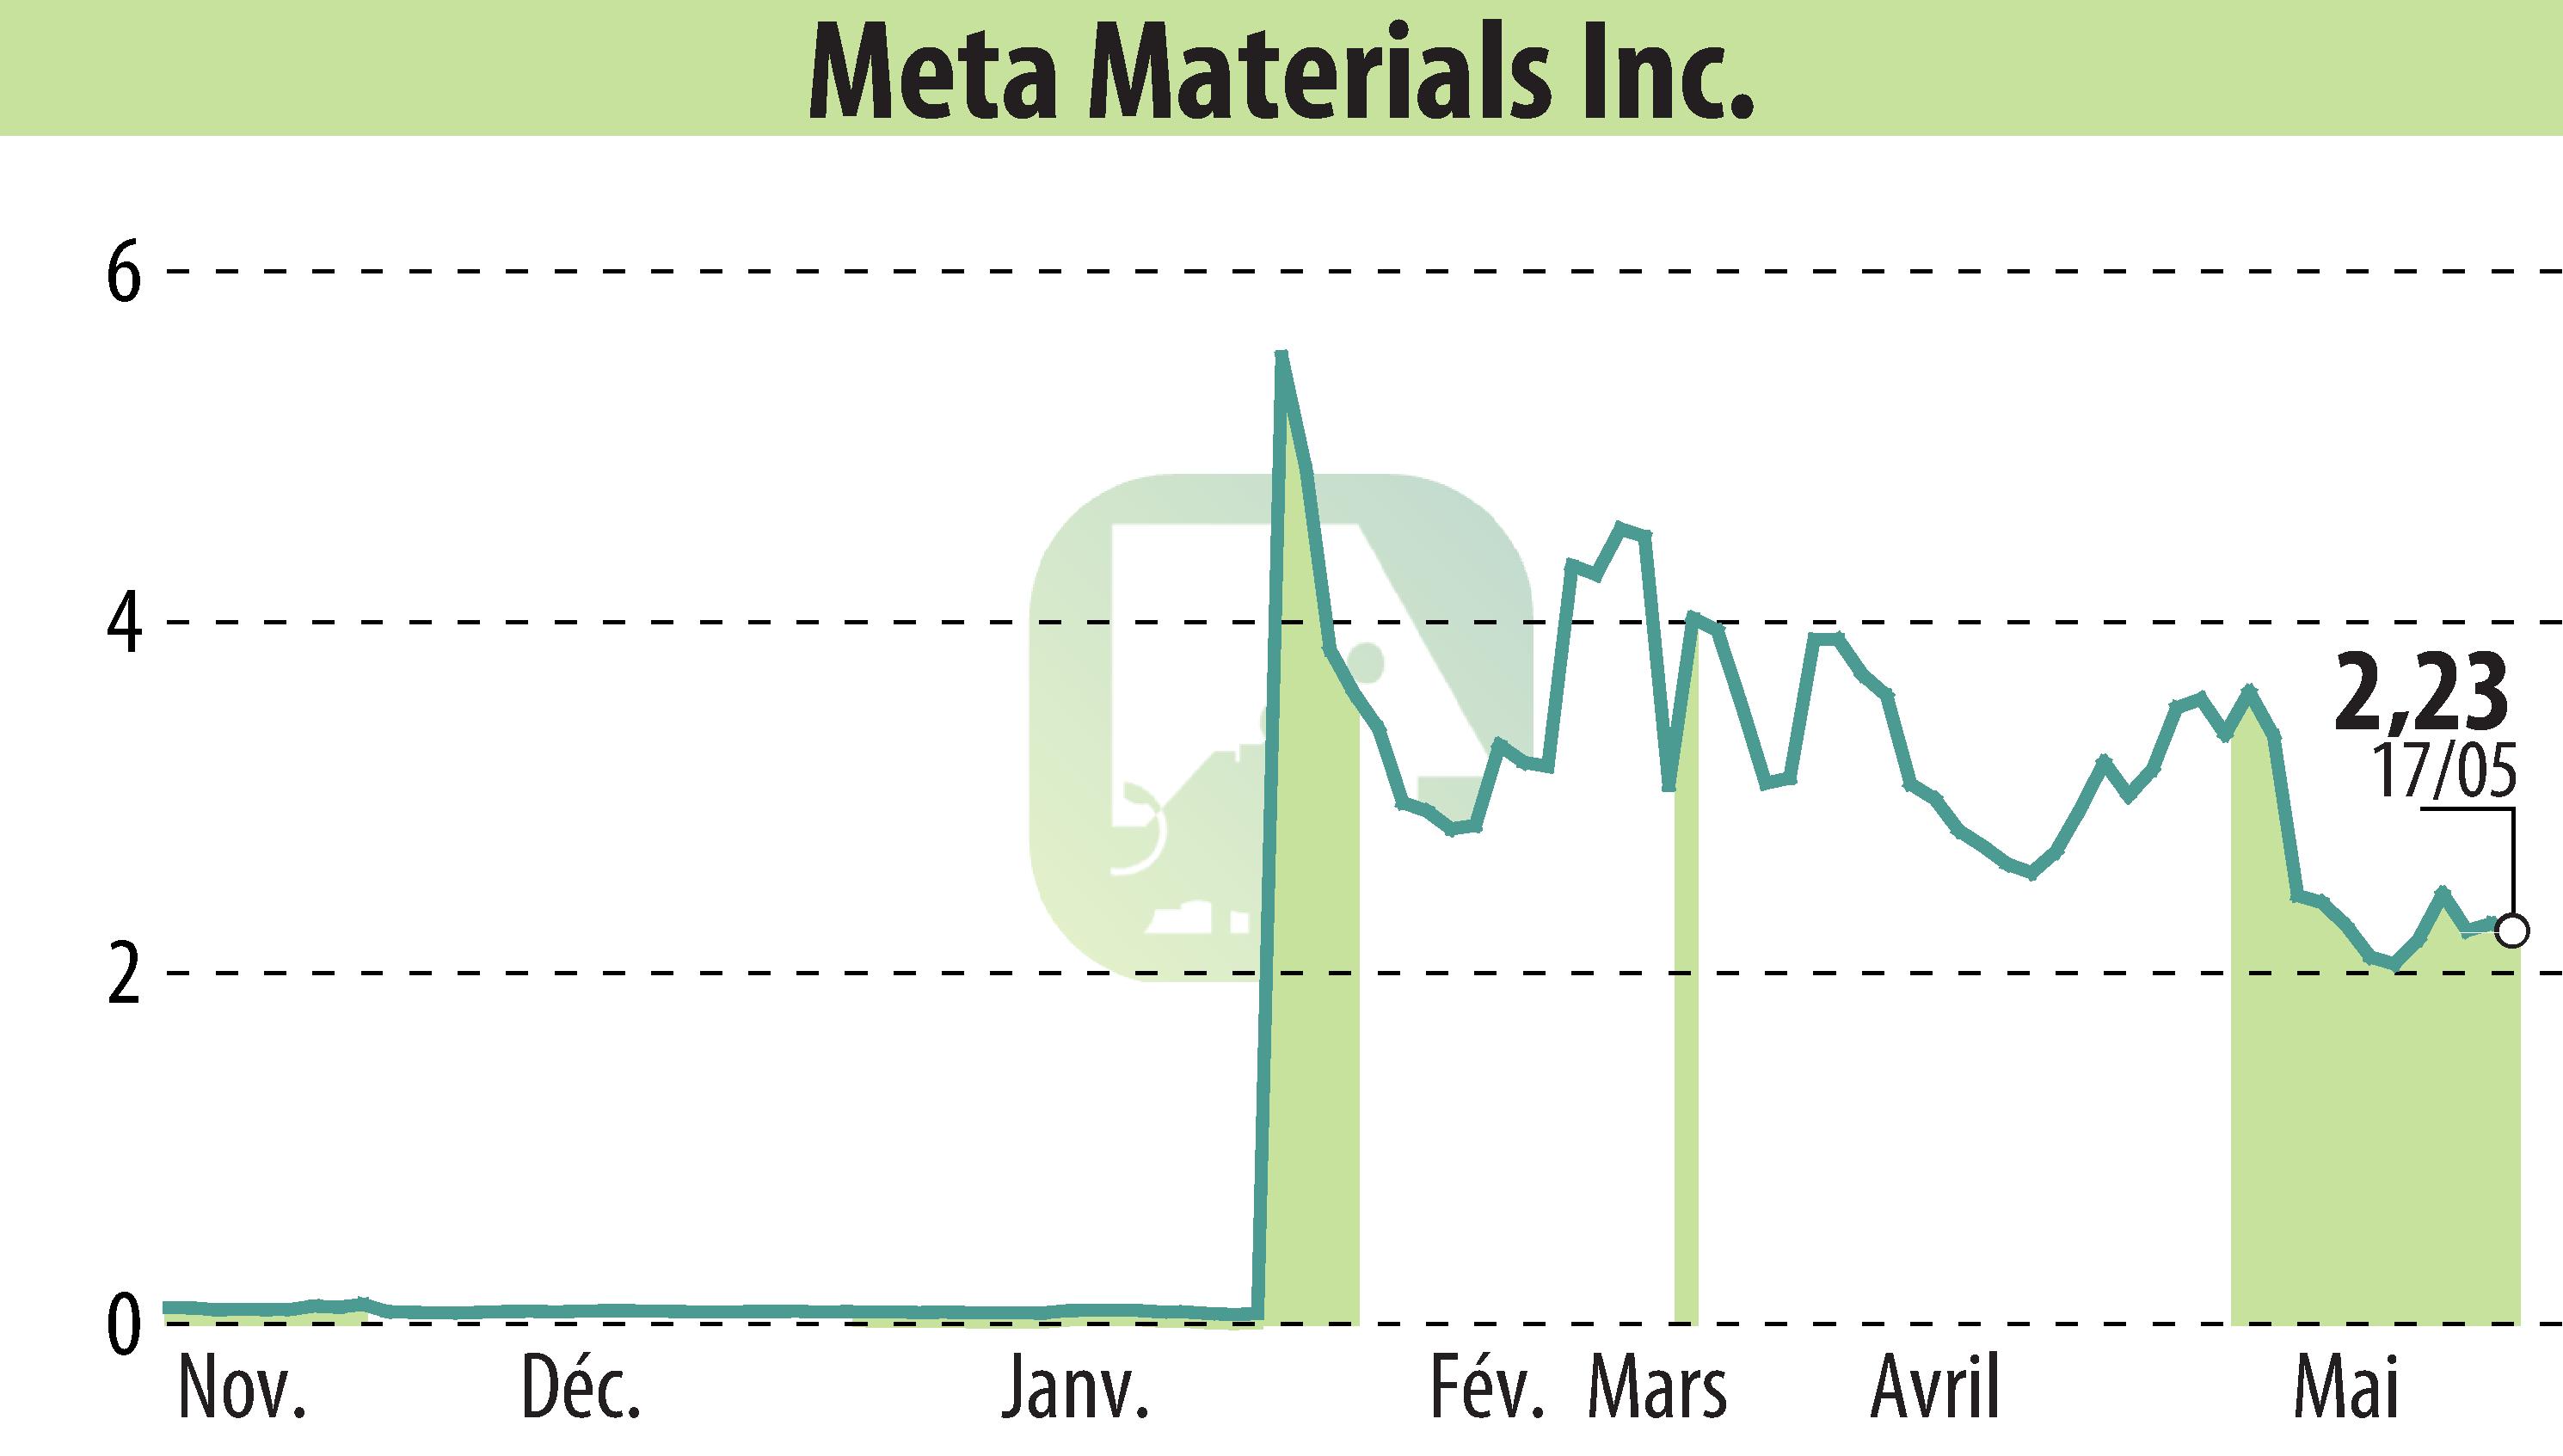 Stock price chart of Meta Materials Inc. (EBR:MMAT) showing fluctuations.